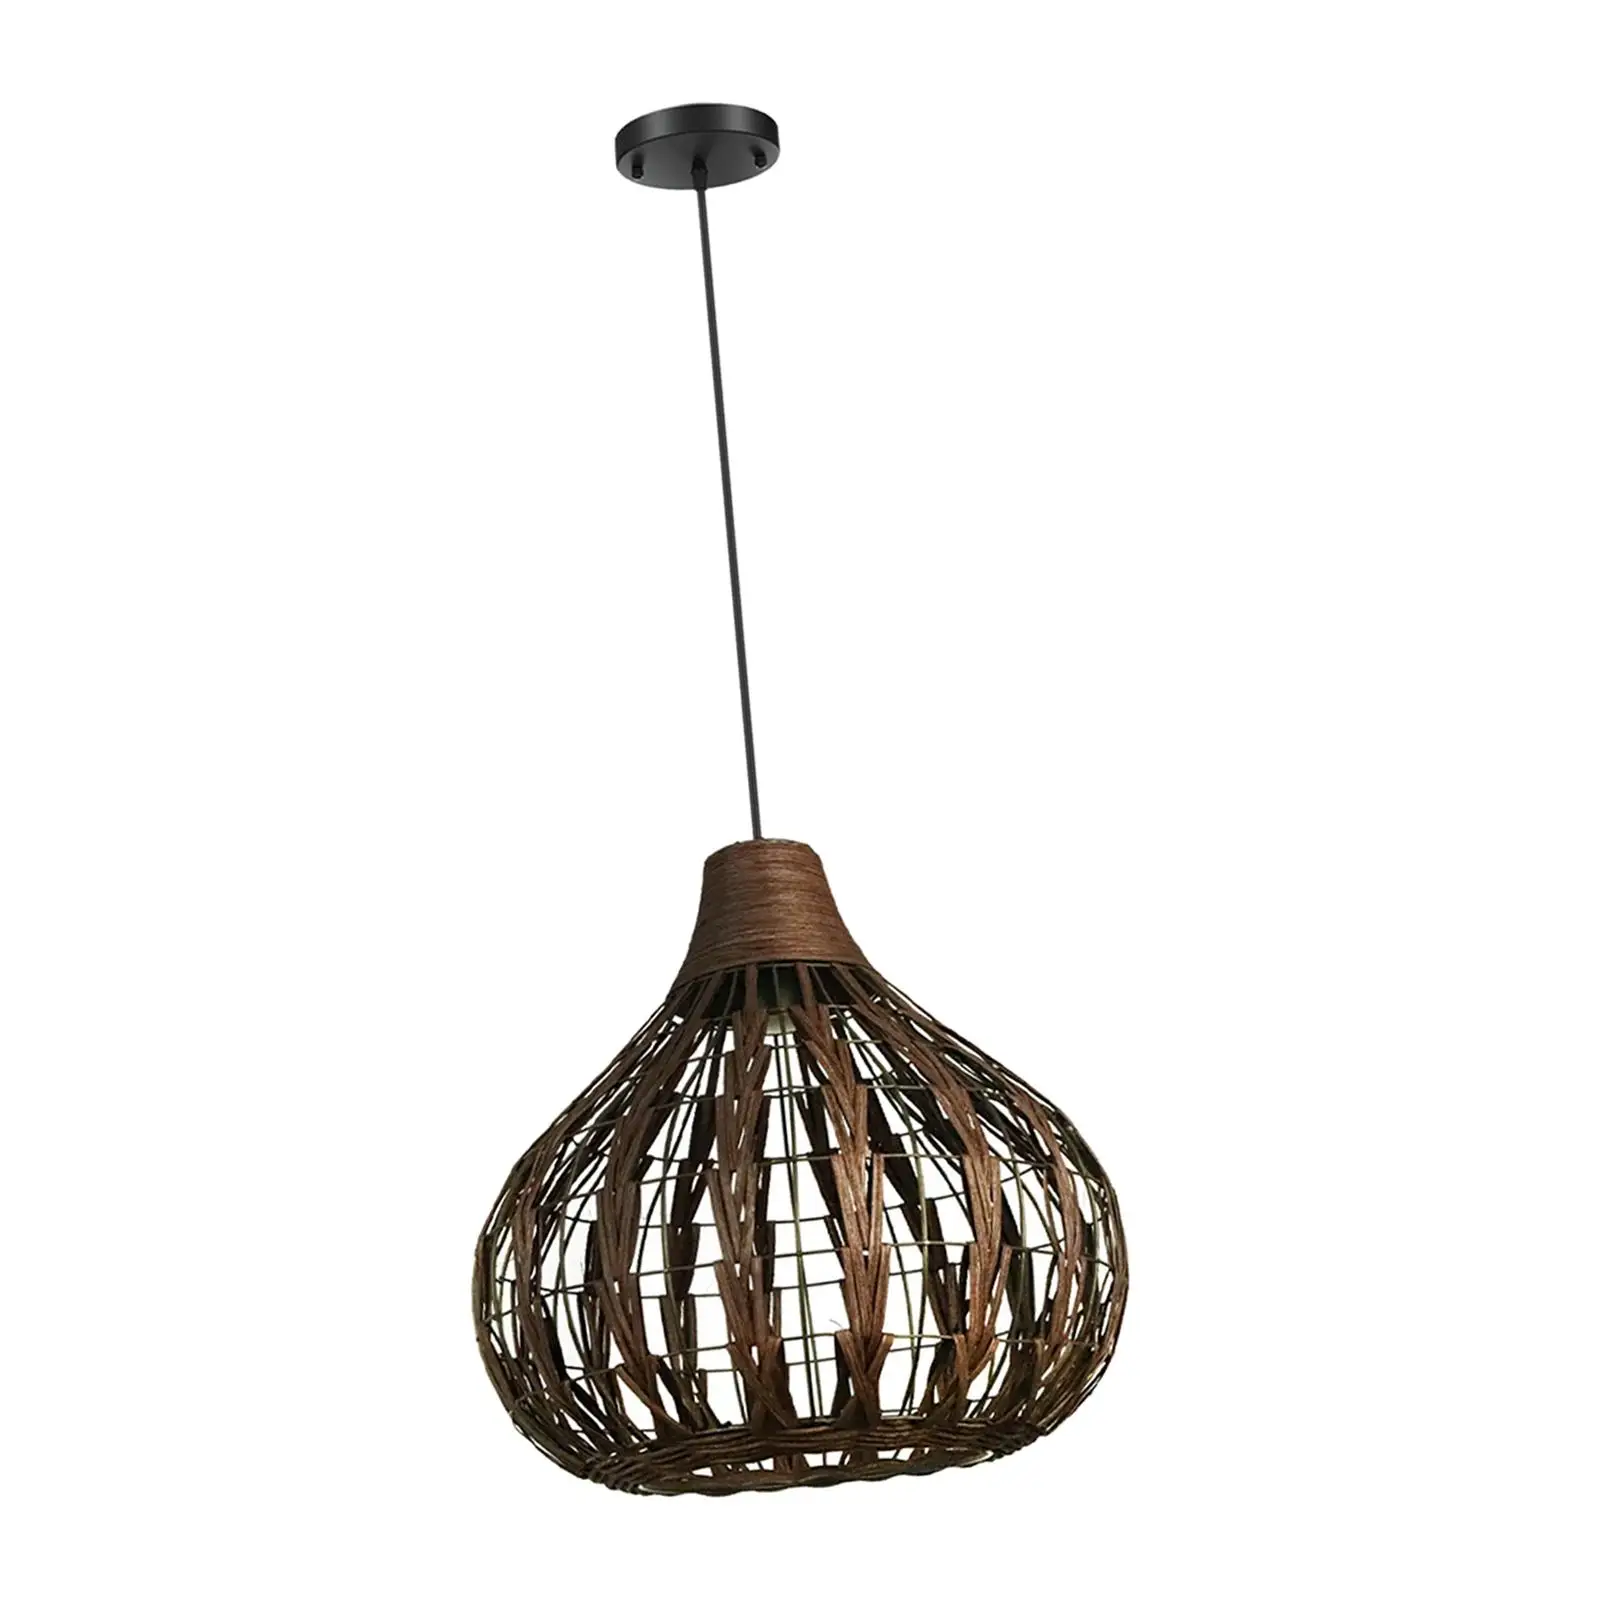 Ceiling Bamboo Lampshade Lamp Shade Chandelier Woven Boho Hanging Pendant Light Cover for Hotel, Balcony, Porch, Corridor, Home